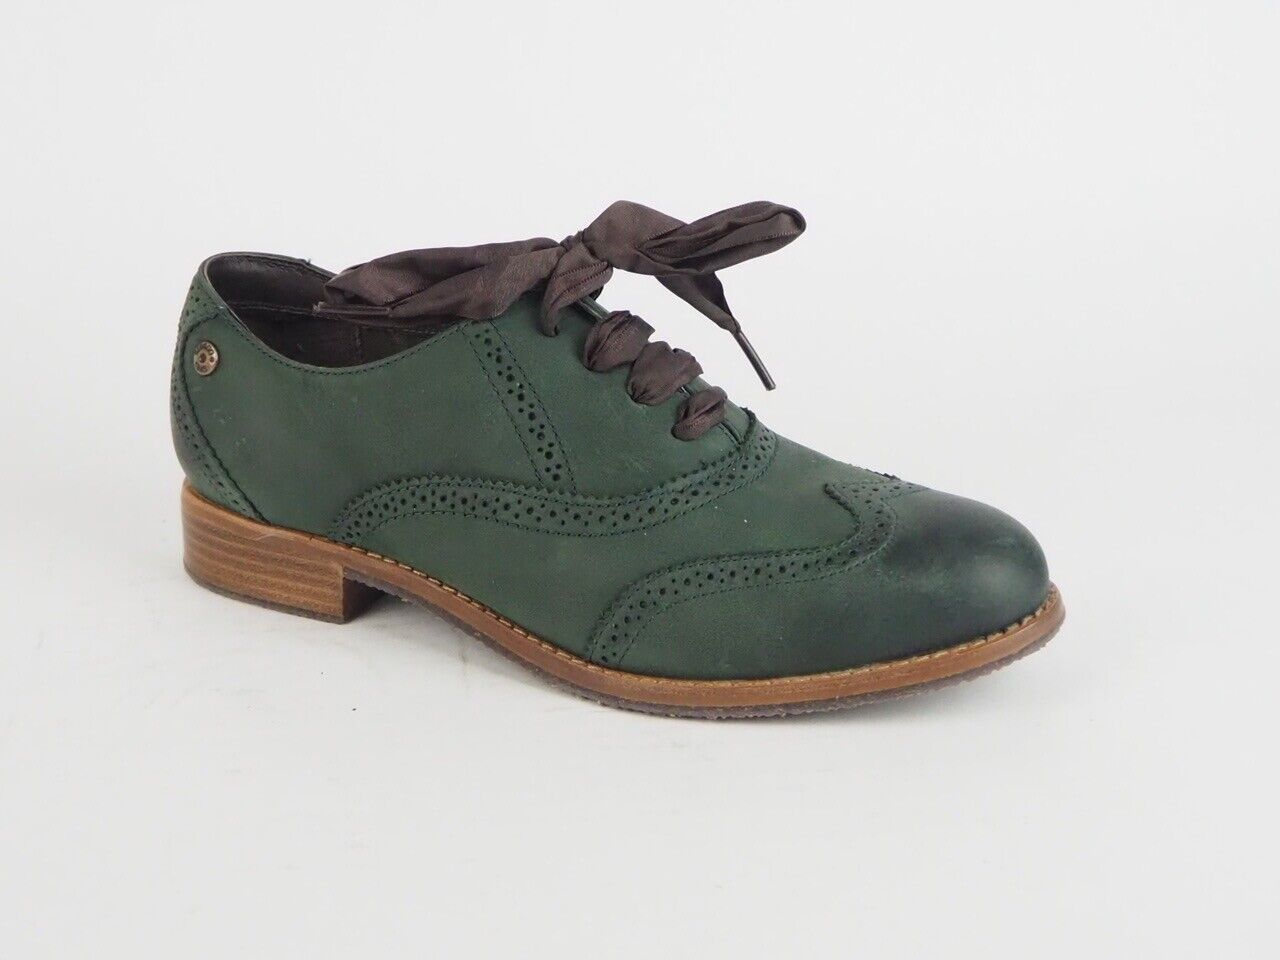 Womens Sebago Claremont Brogue B40300 W Leather Lace Up Green Oxford Shoes - London Top Style